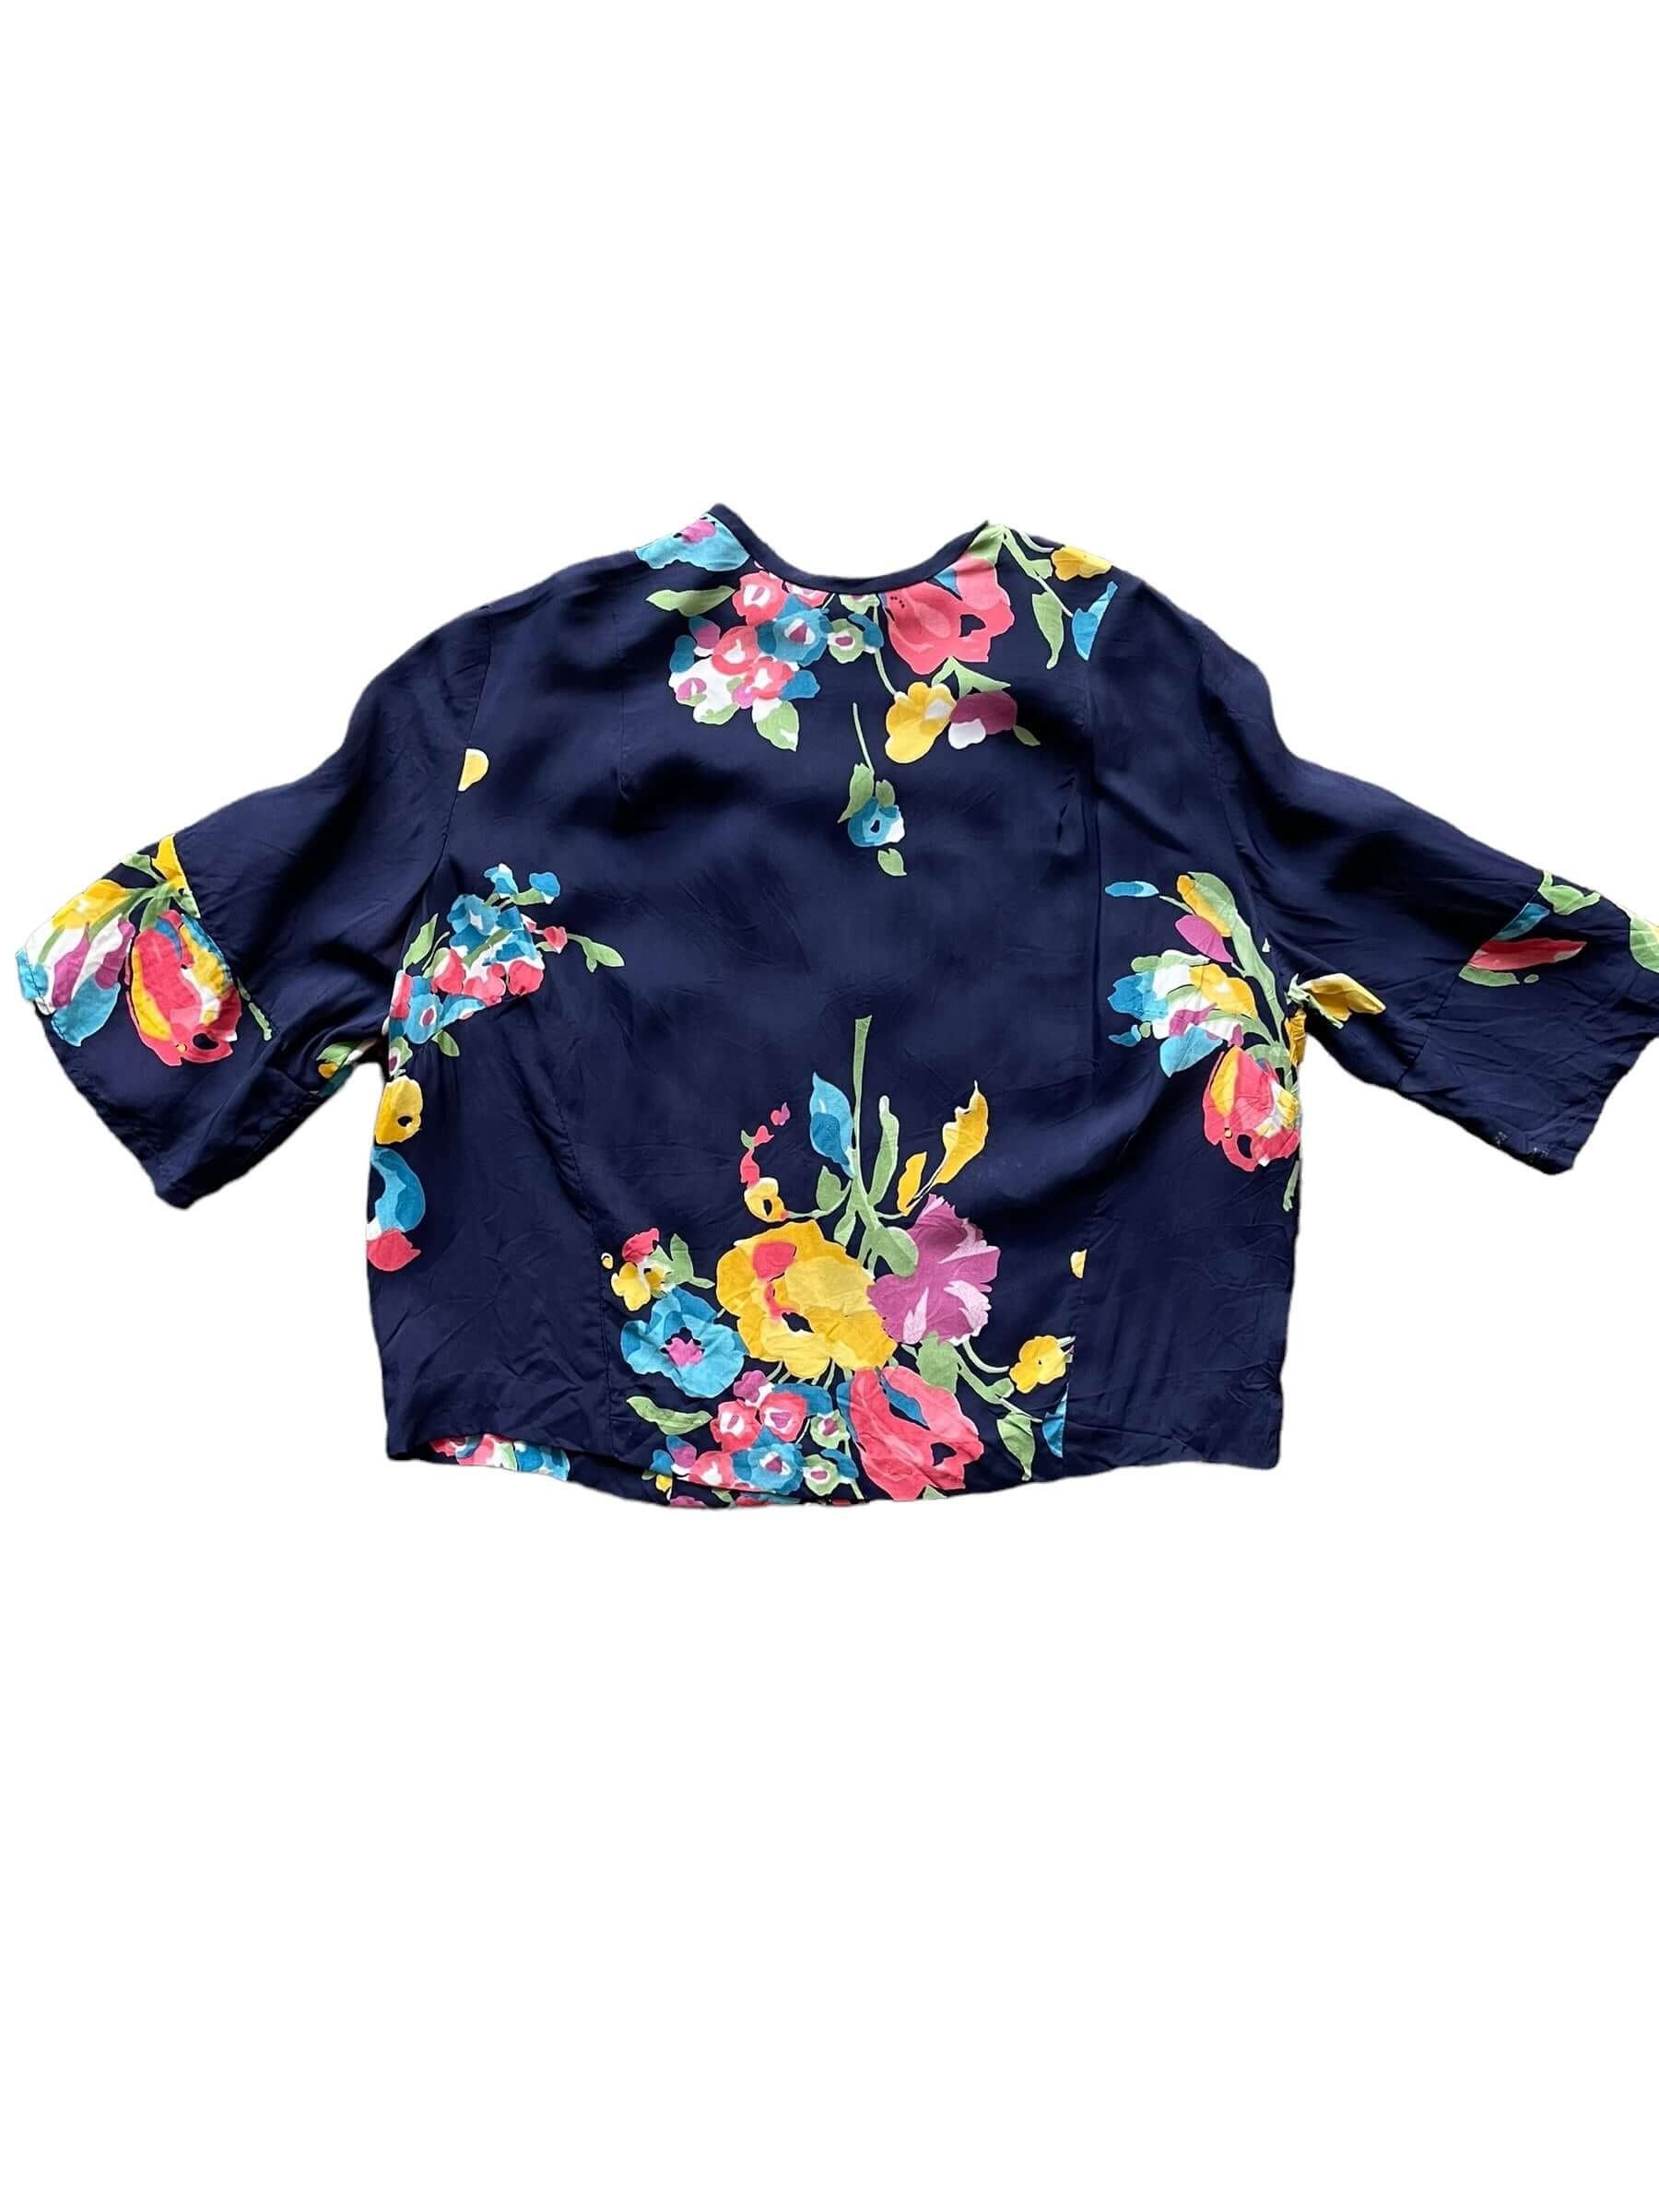 Full front view of 1950-60s Rayon Navy Floral Top M-L